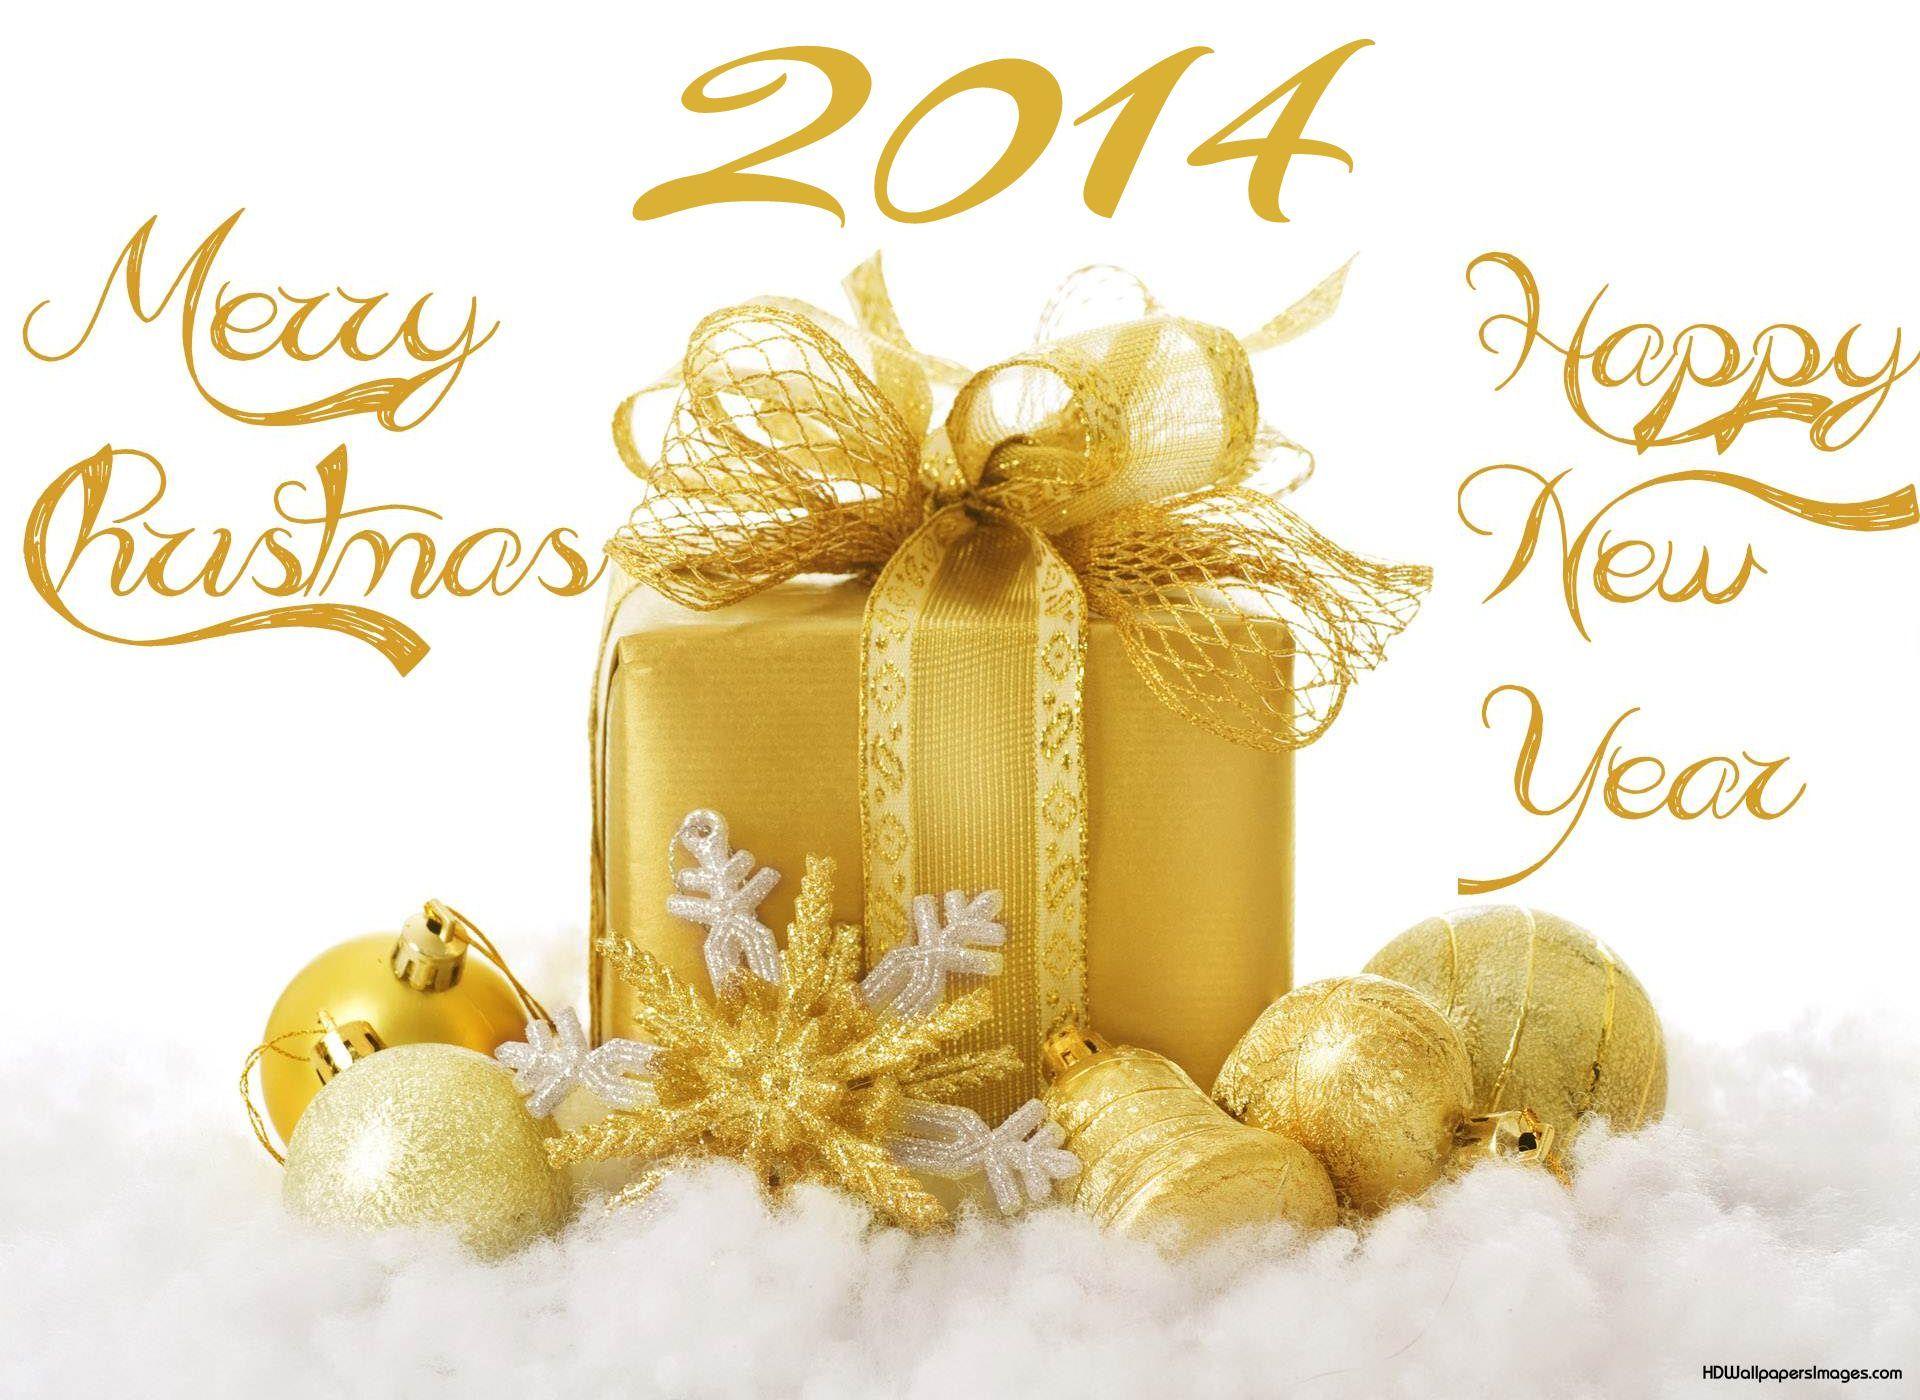 Download Free New Year 2014 Wallpaper Download Free New Year 2014